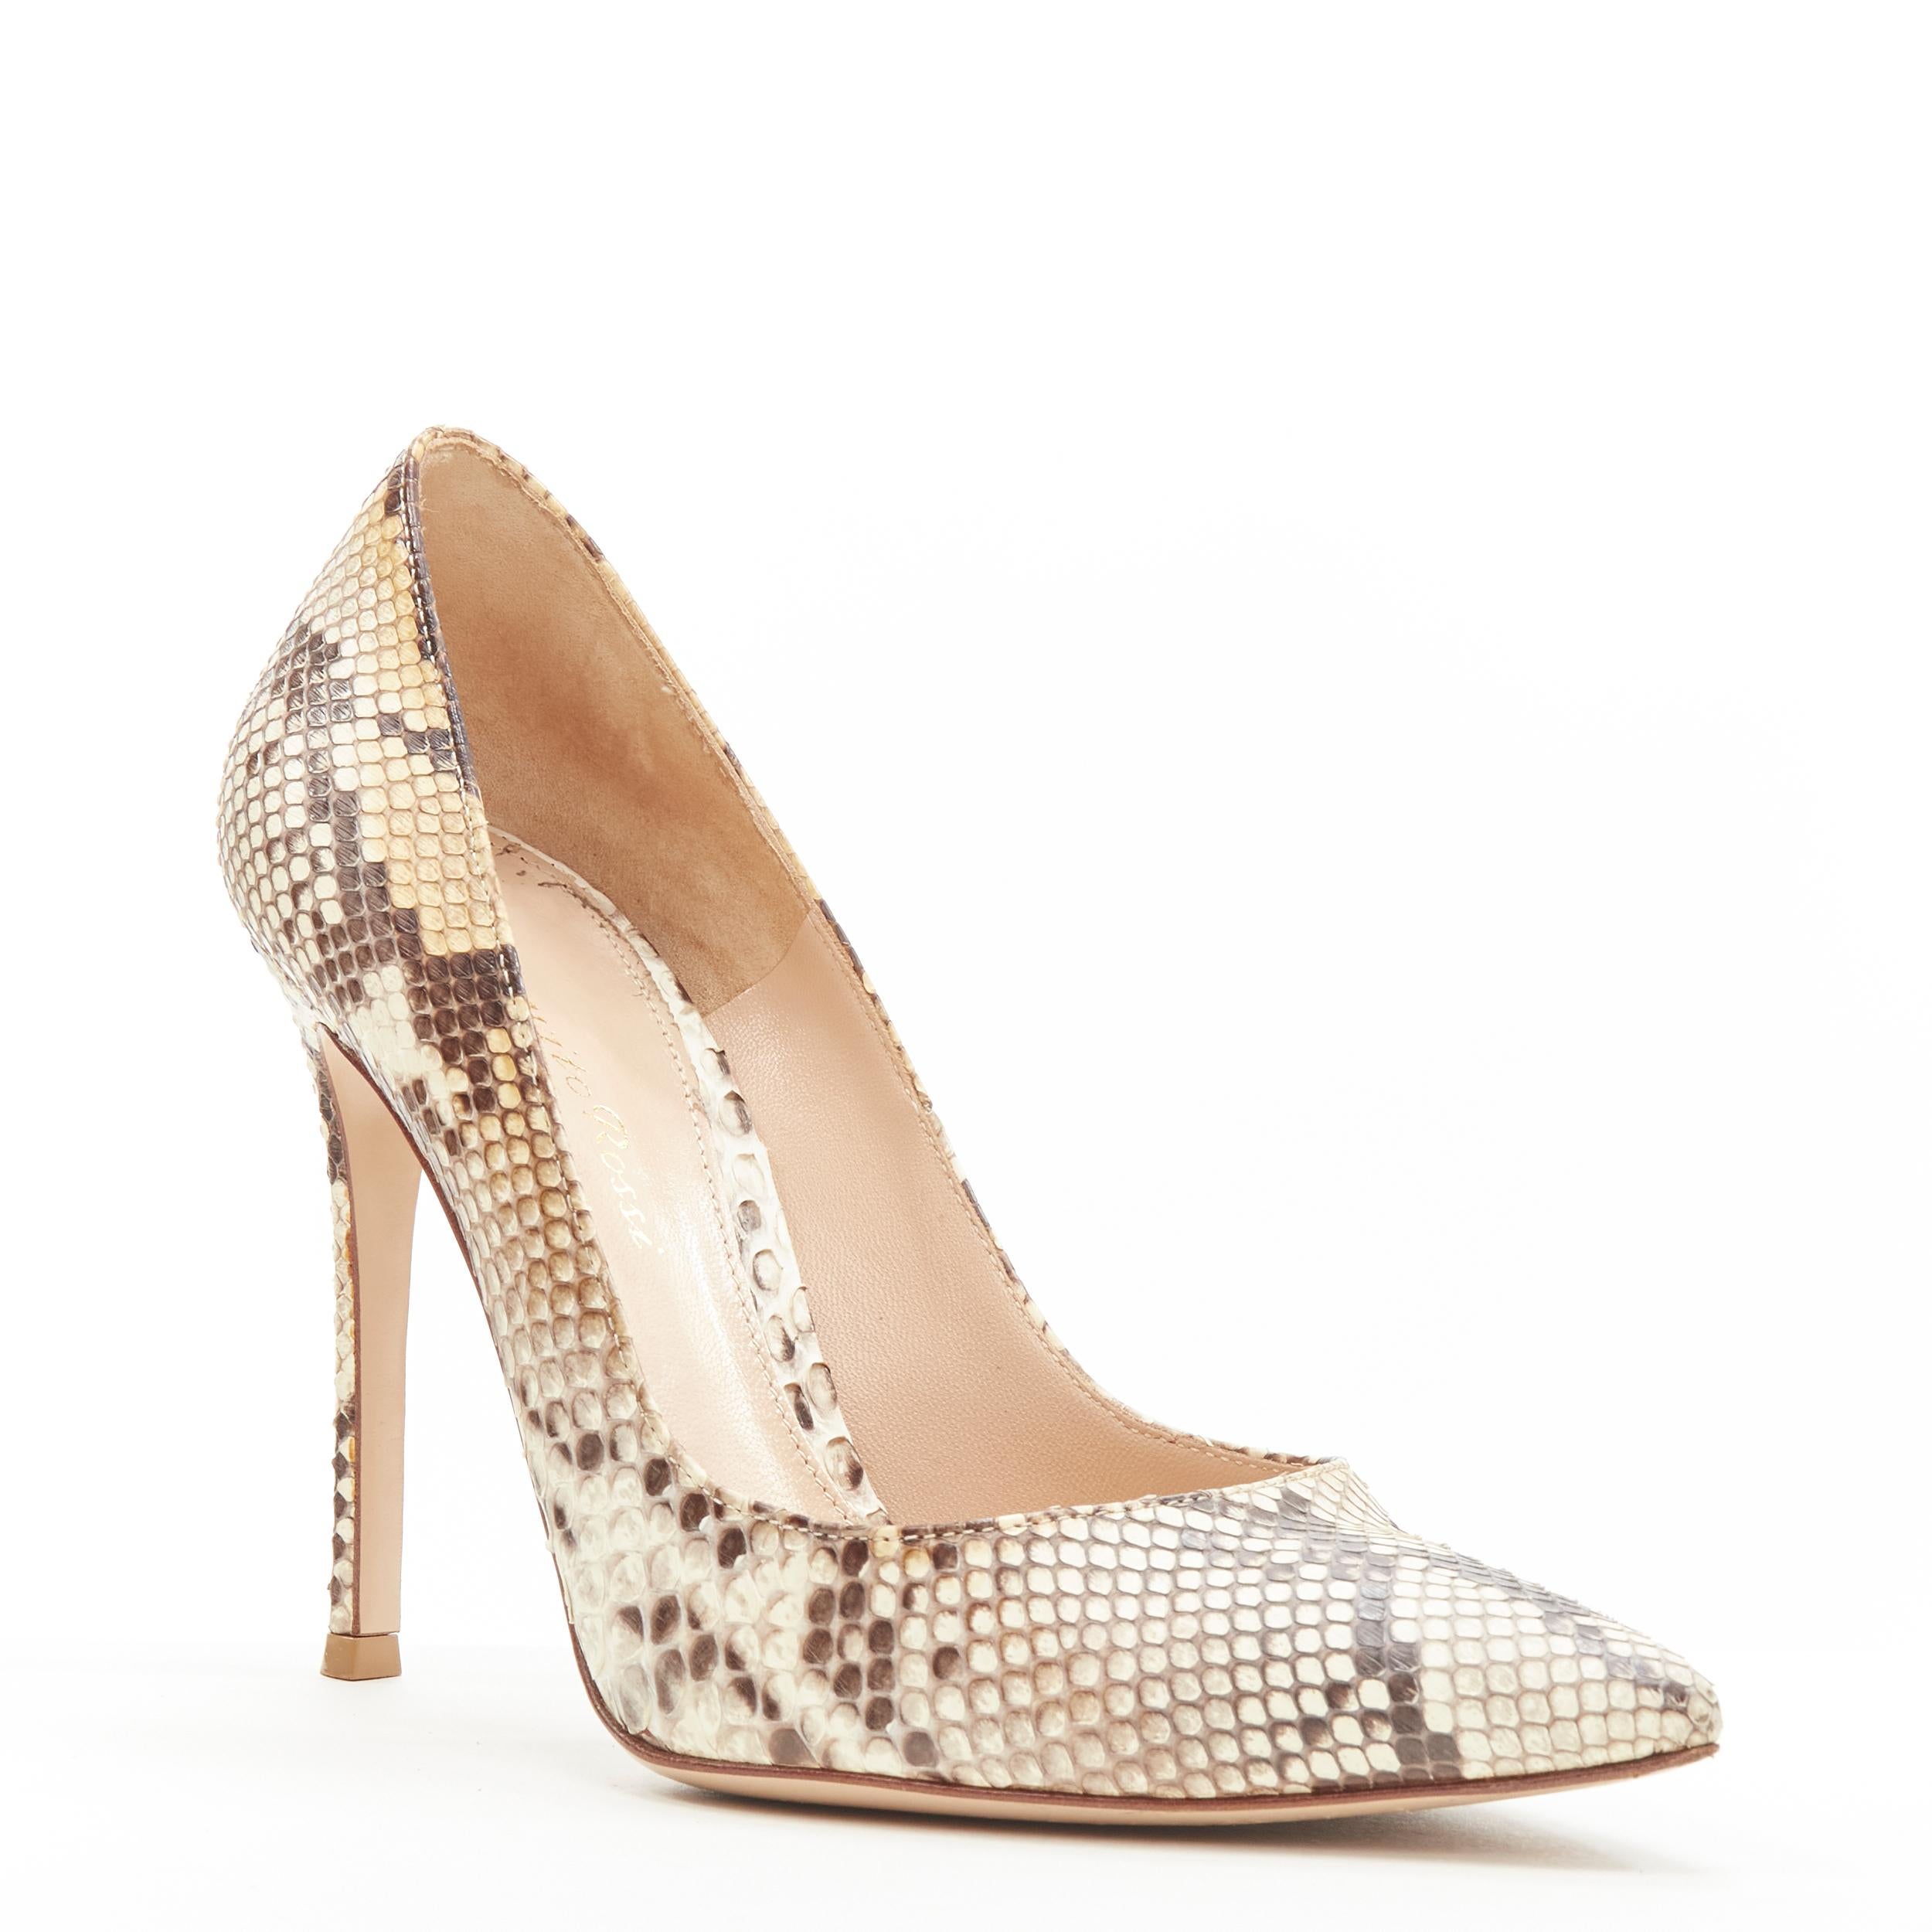 GIANVITO ROSSI brown natural scaled leather pigalle stiletto pump EU37.5 
Reference: LNKO/A01993 
Brand: Gianvito Rossi 
Material: Leather 
Color: Brown 
Pattern: Scaled 
Extra Detail: Genuine scaled leather. 
Made in: Italy 


CONDITION: